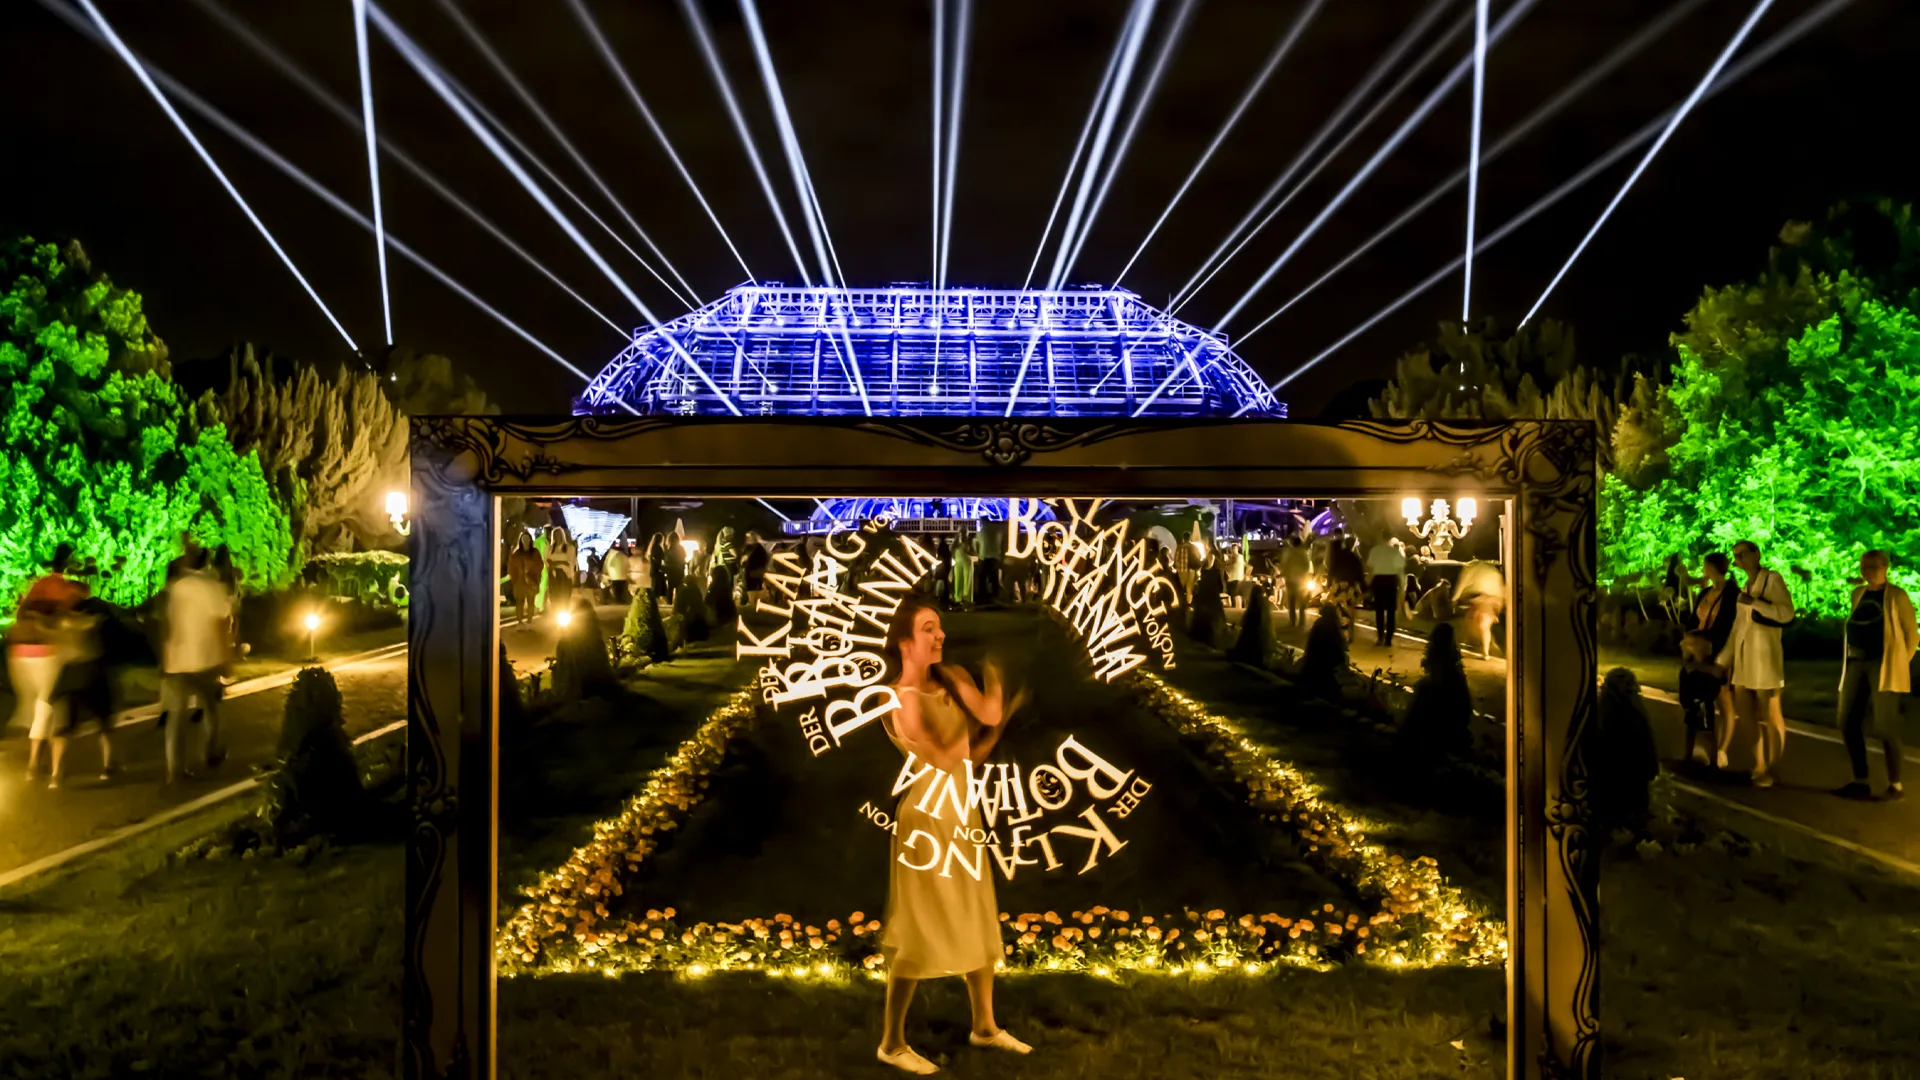 A picture shows artists at the Botanical Night in the Botanical Garden in Berlin.